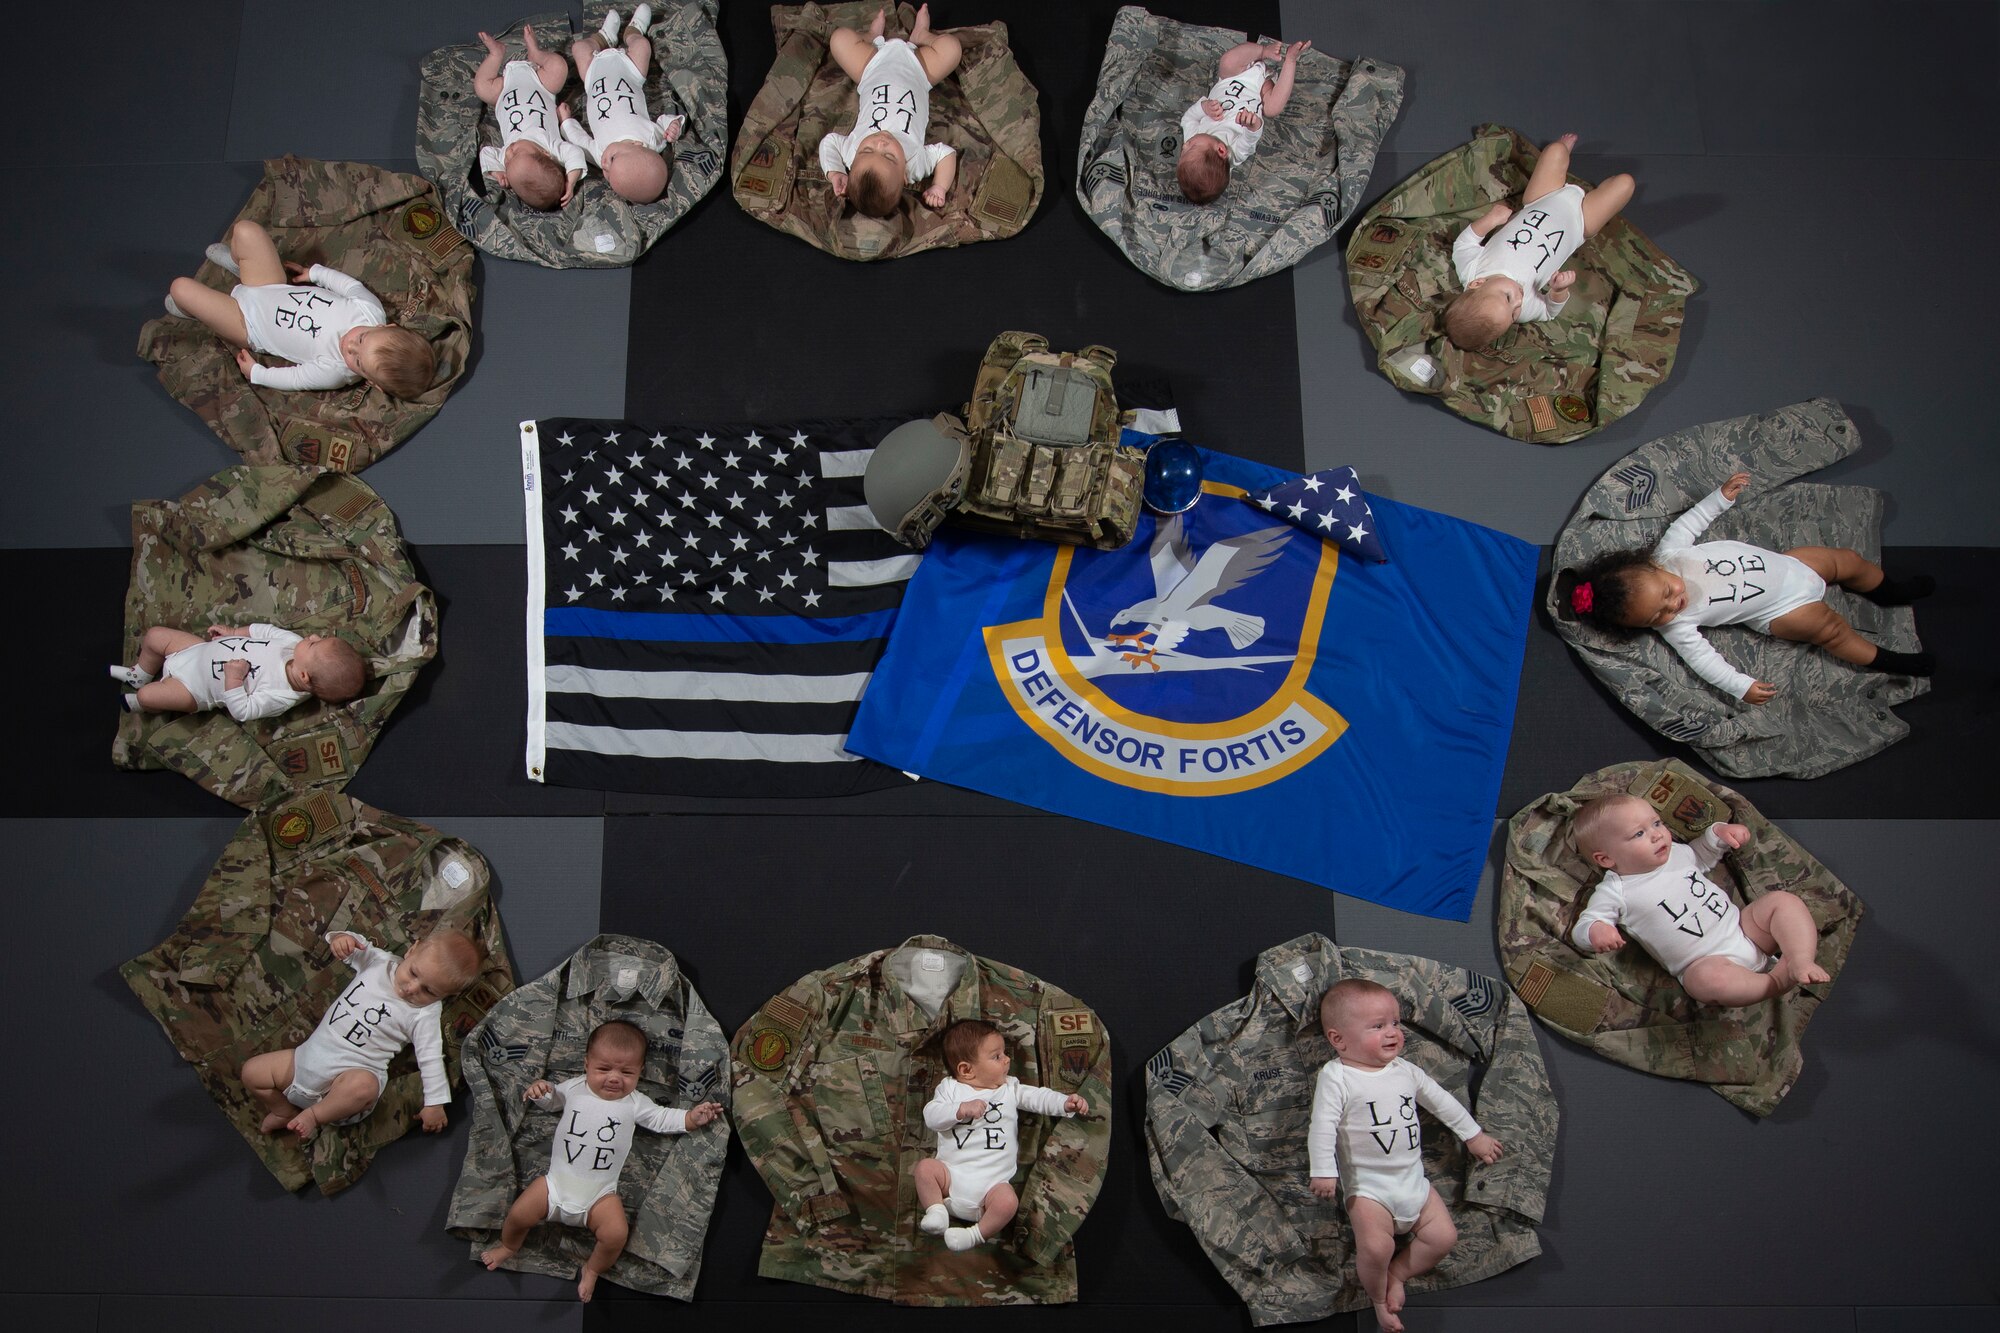 Thirteen babies lay on their parents uniforms Nov. 20, 2019, at Mountain Home Air Force Base, Idaho. The U.S. Air Force has annouced 2019 as the Year of the Defender in honor of security forces members. (U.S. Air Force photo by Airman Natalie Rubenak)